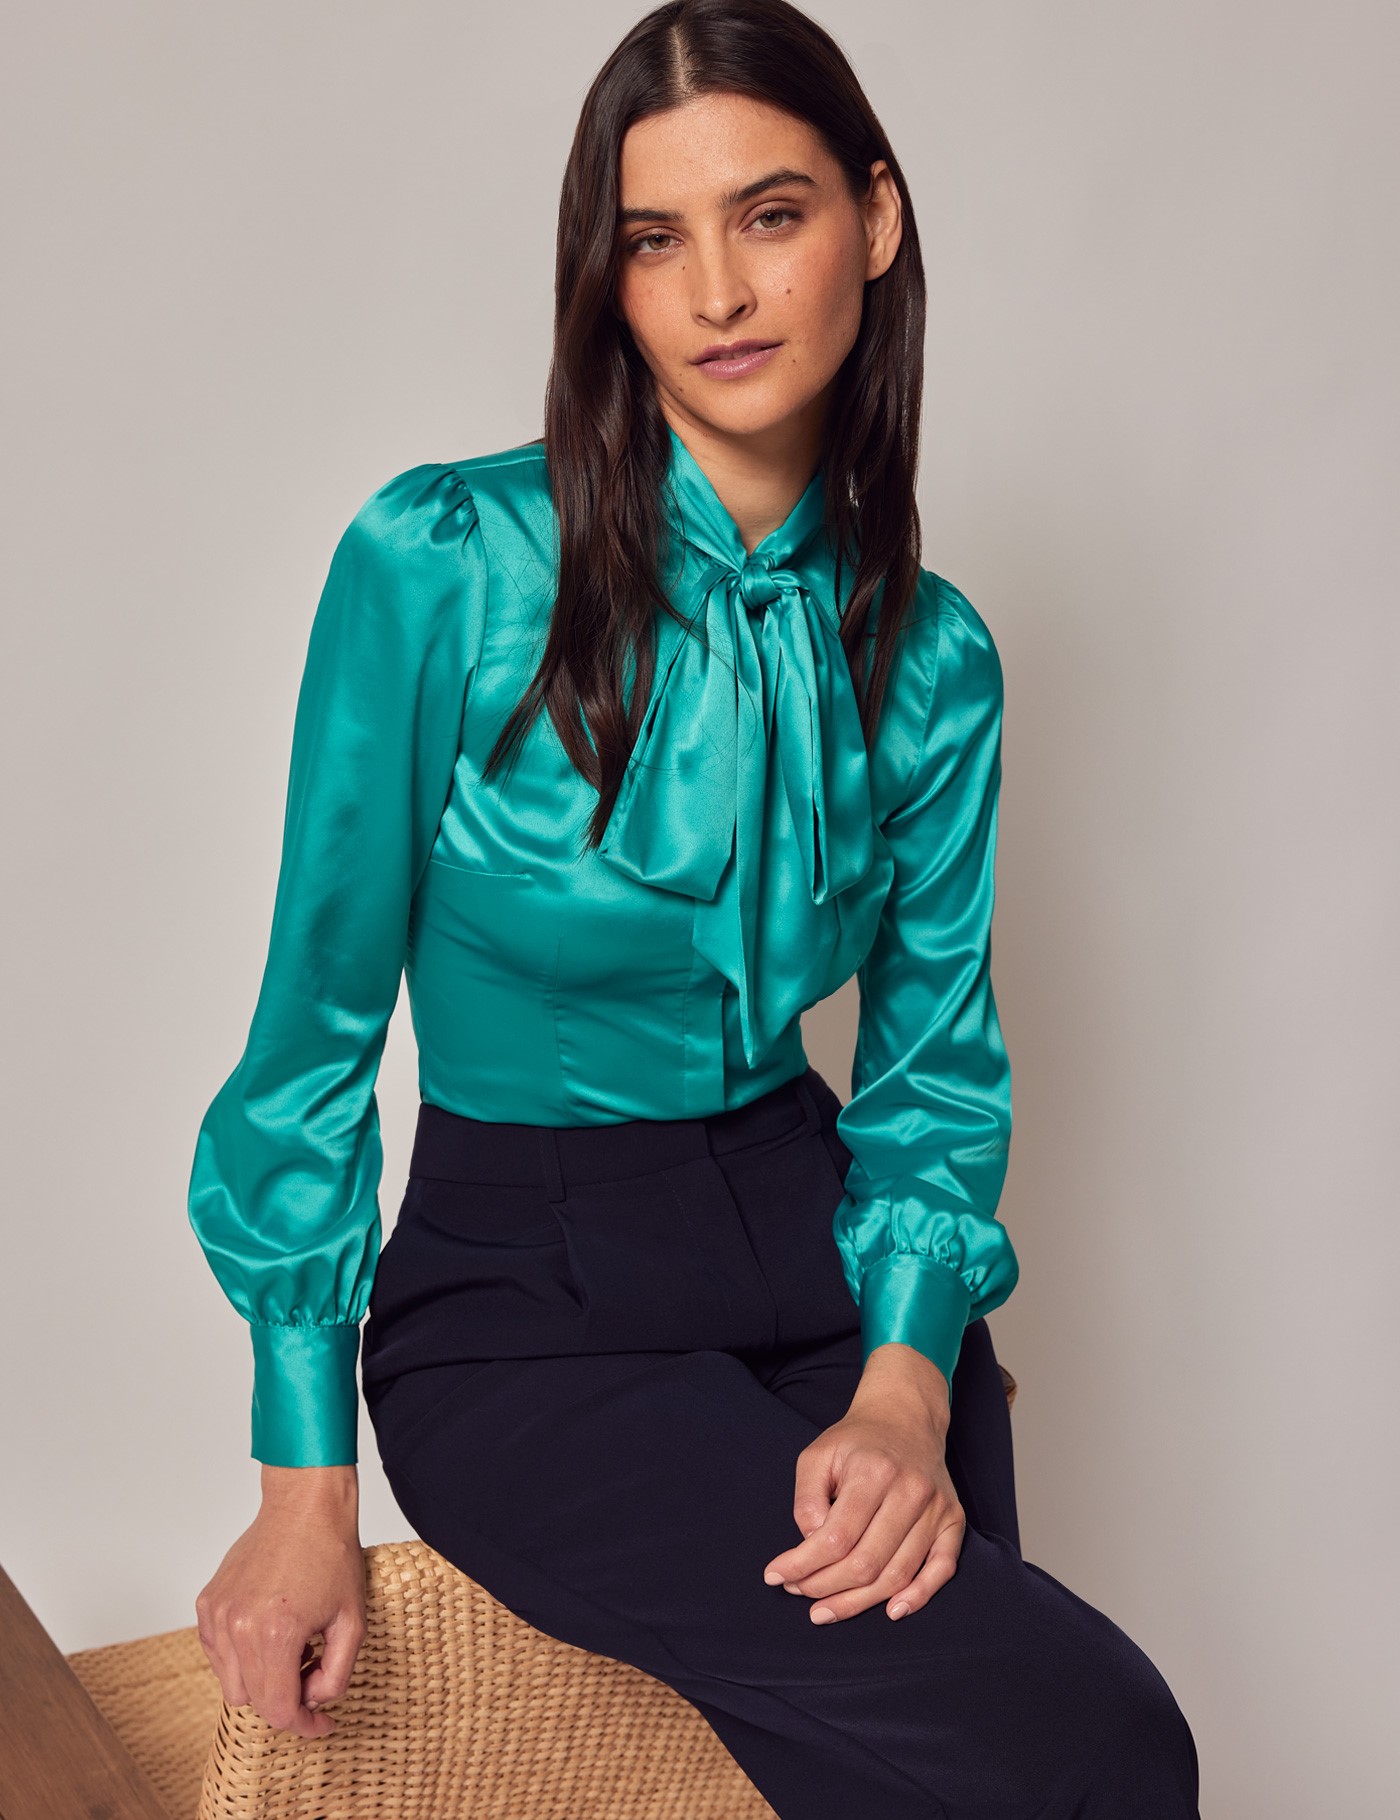 Women's Teal Pussybow Blouse